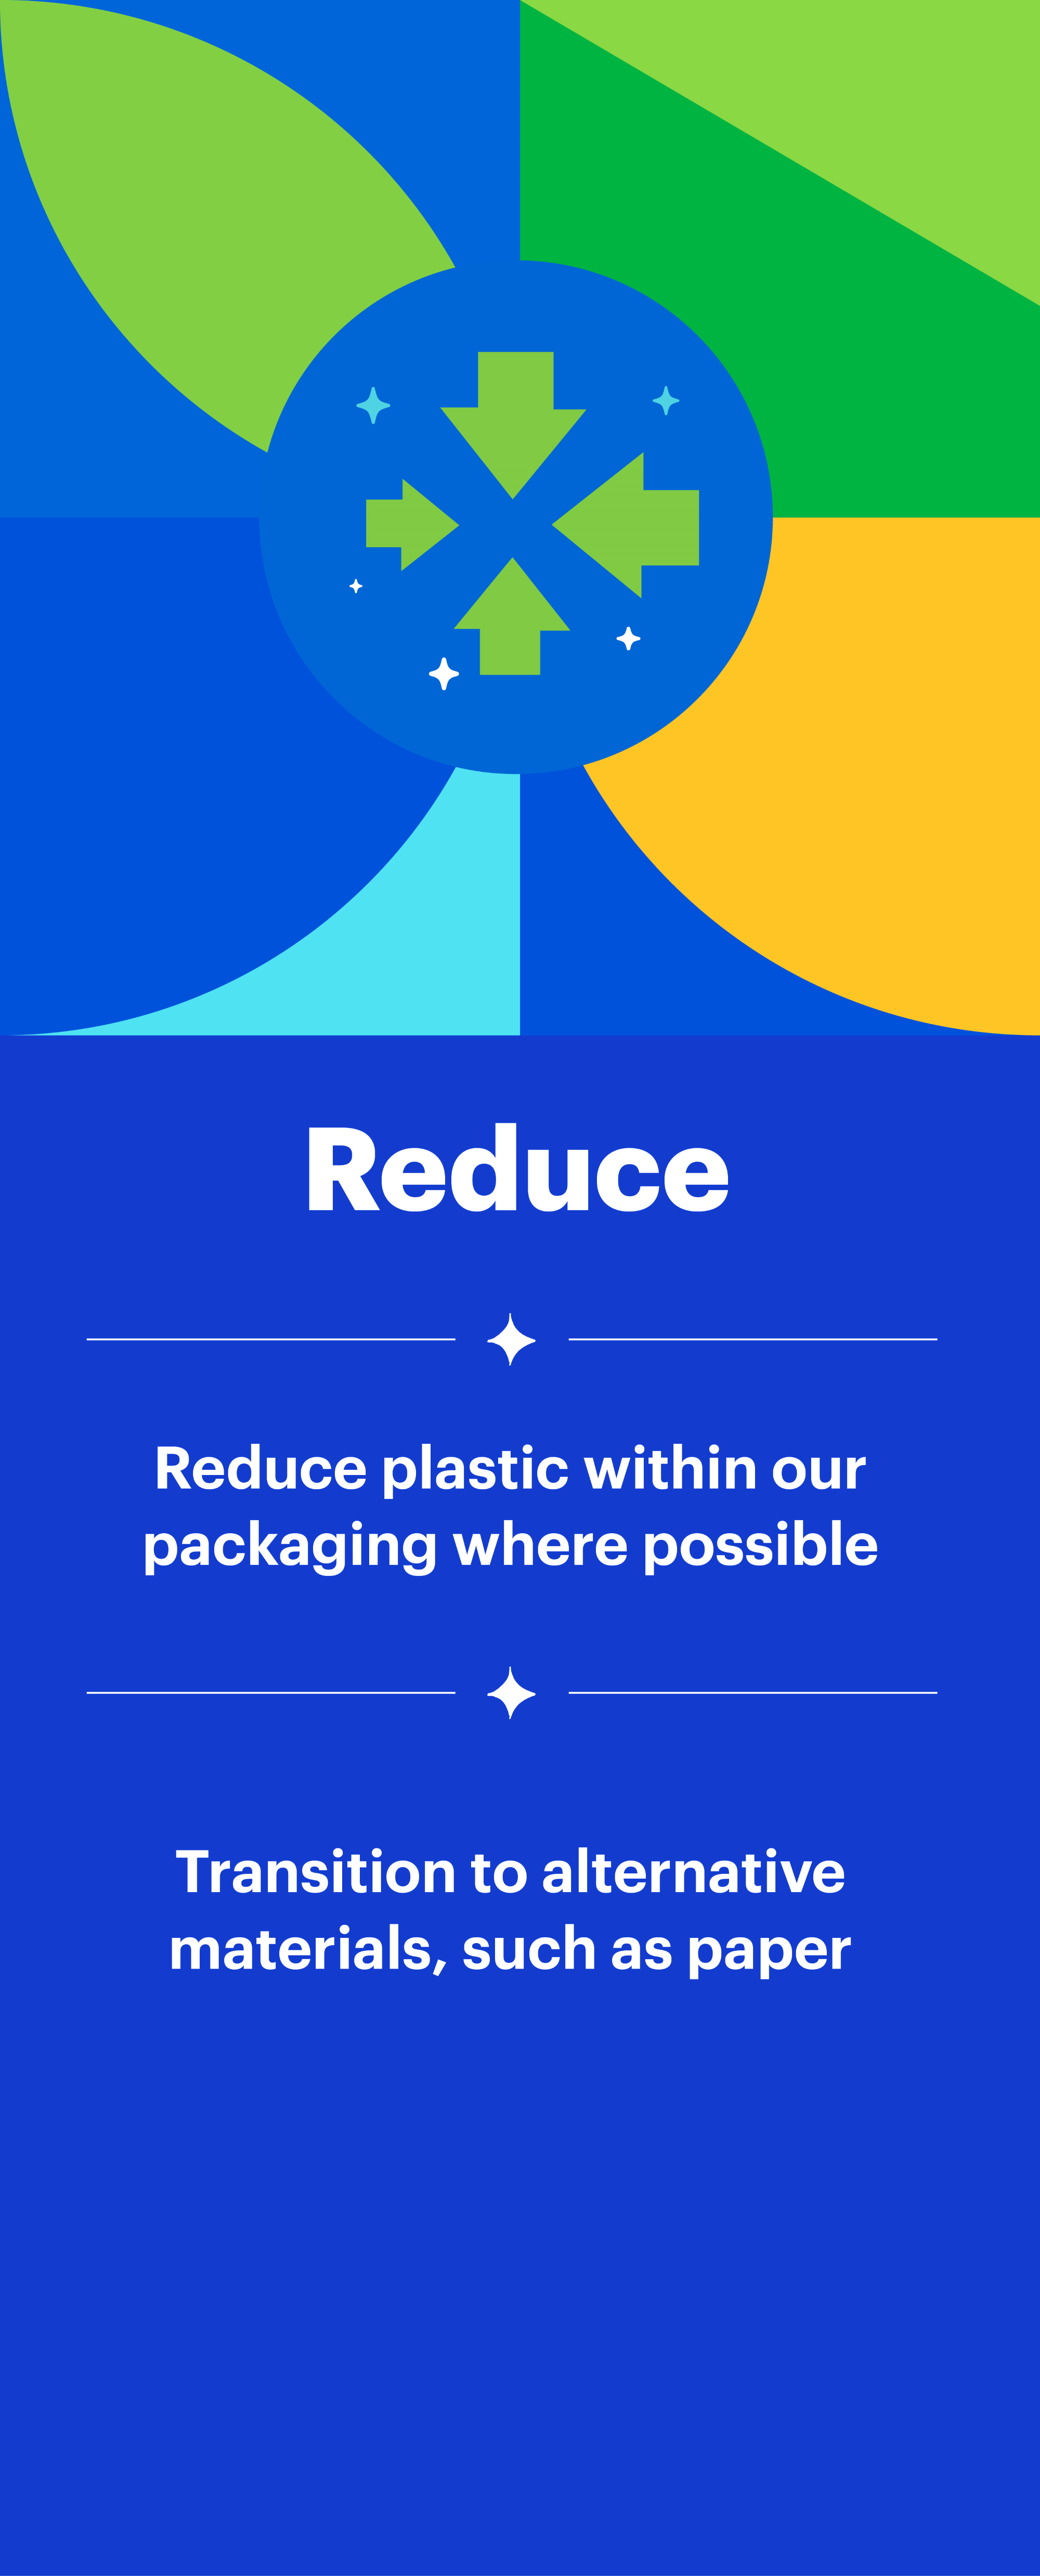 Reduce: Reduce plastic within our packaging where possible. Transition to alternative materials, such as paper.